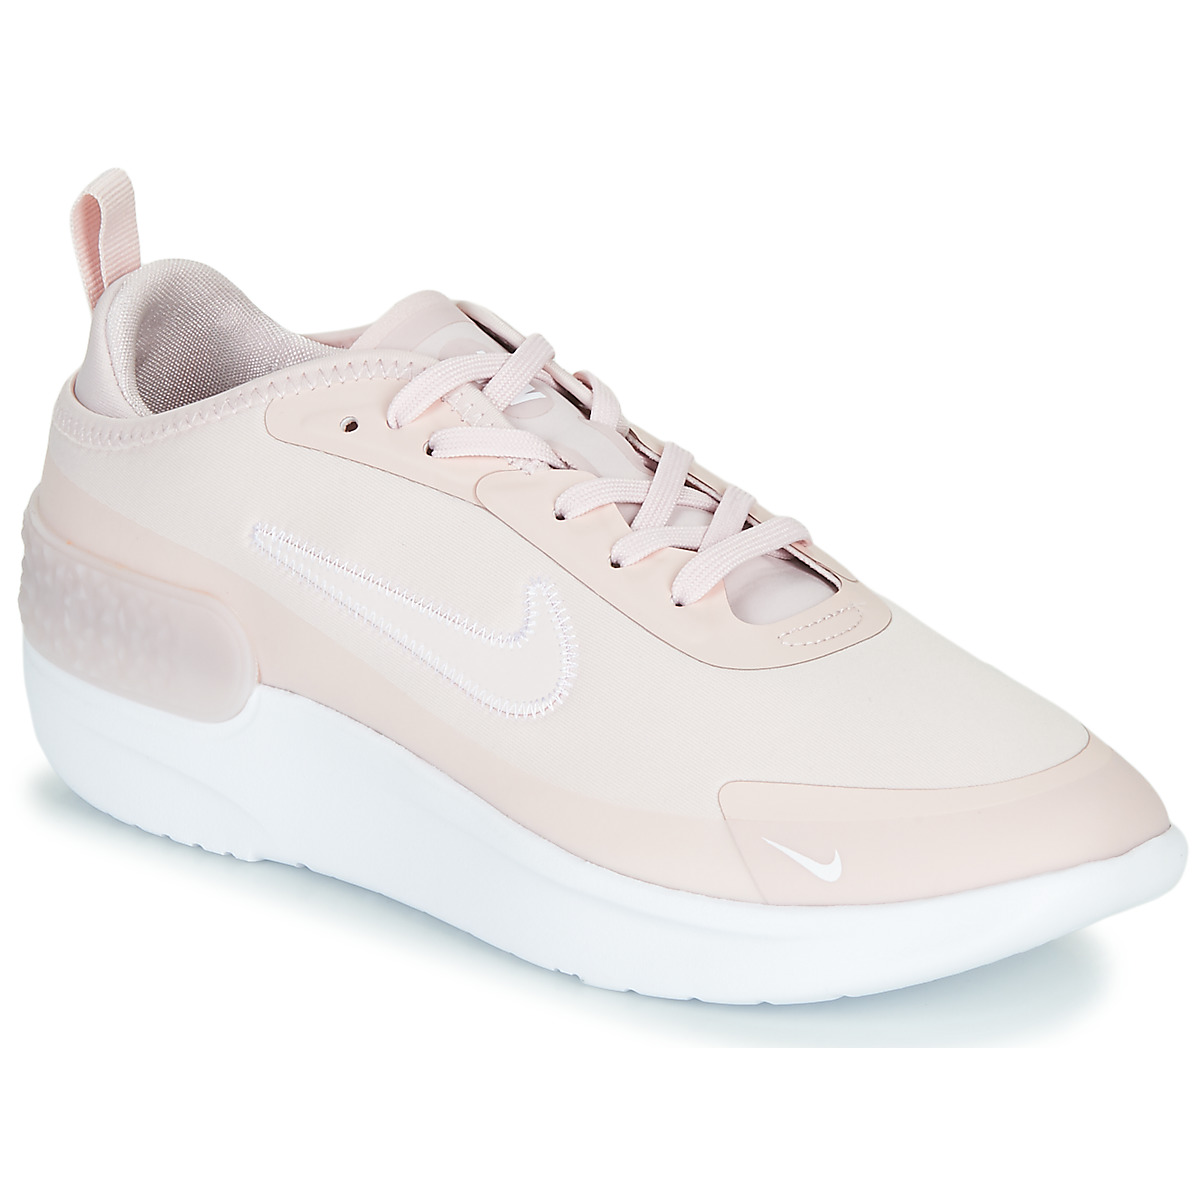 Nike AMIXA Pink / White - Fast delivery 